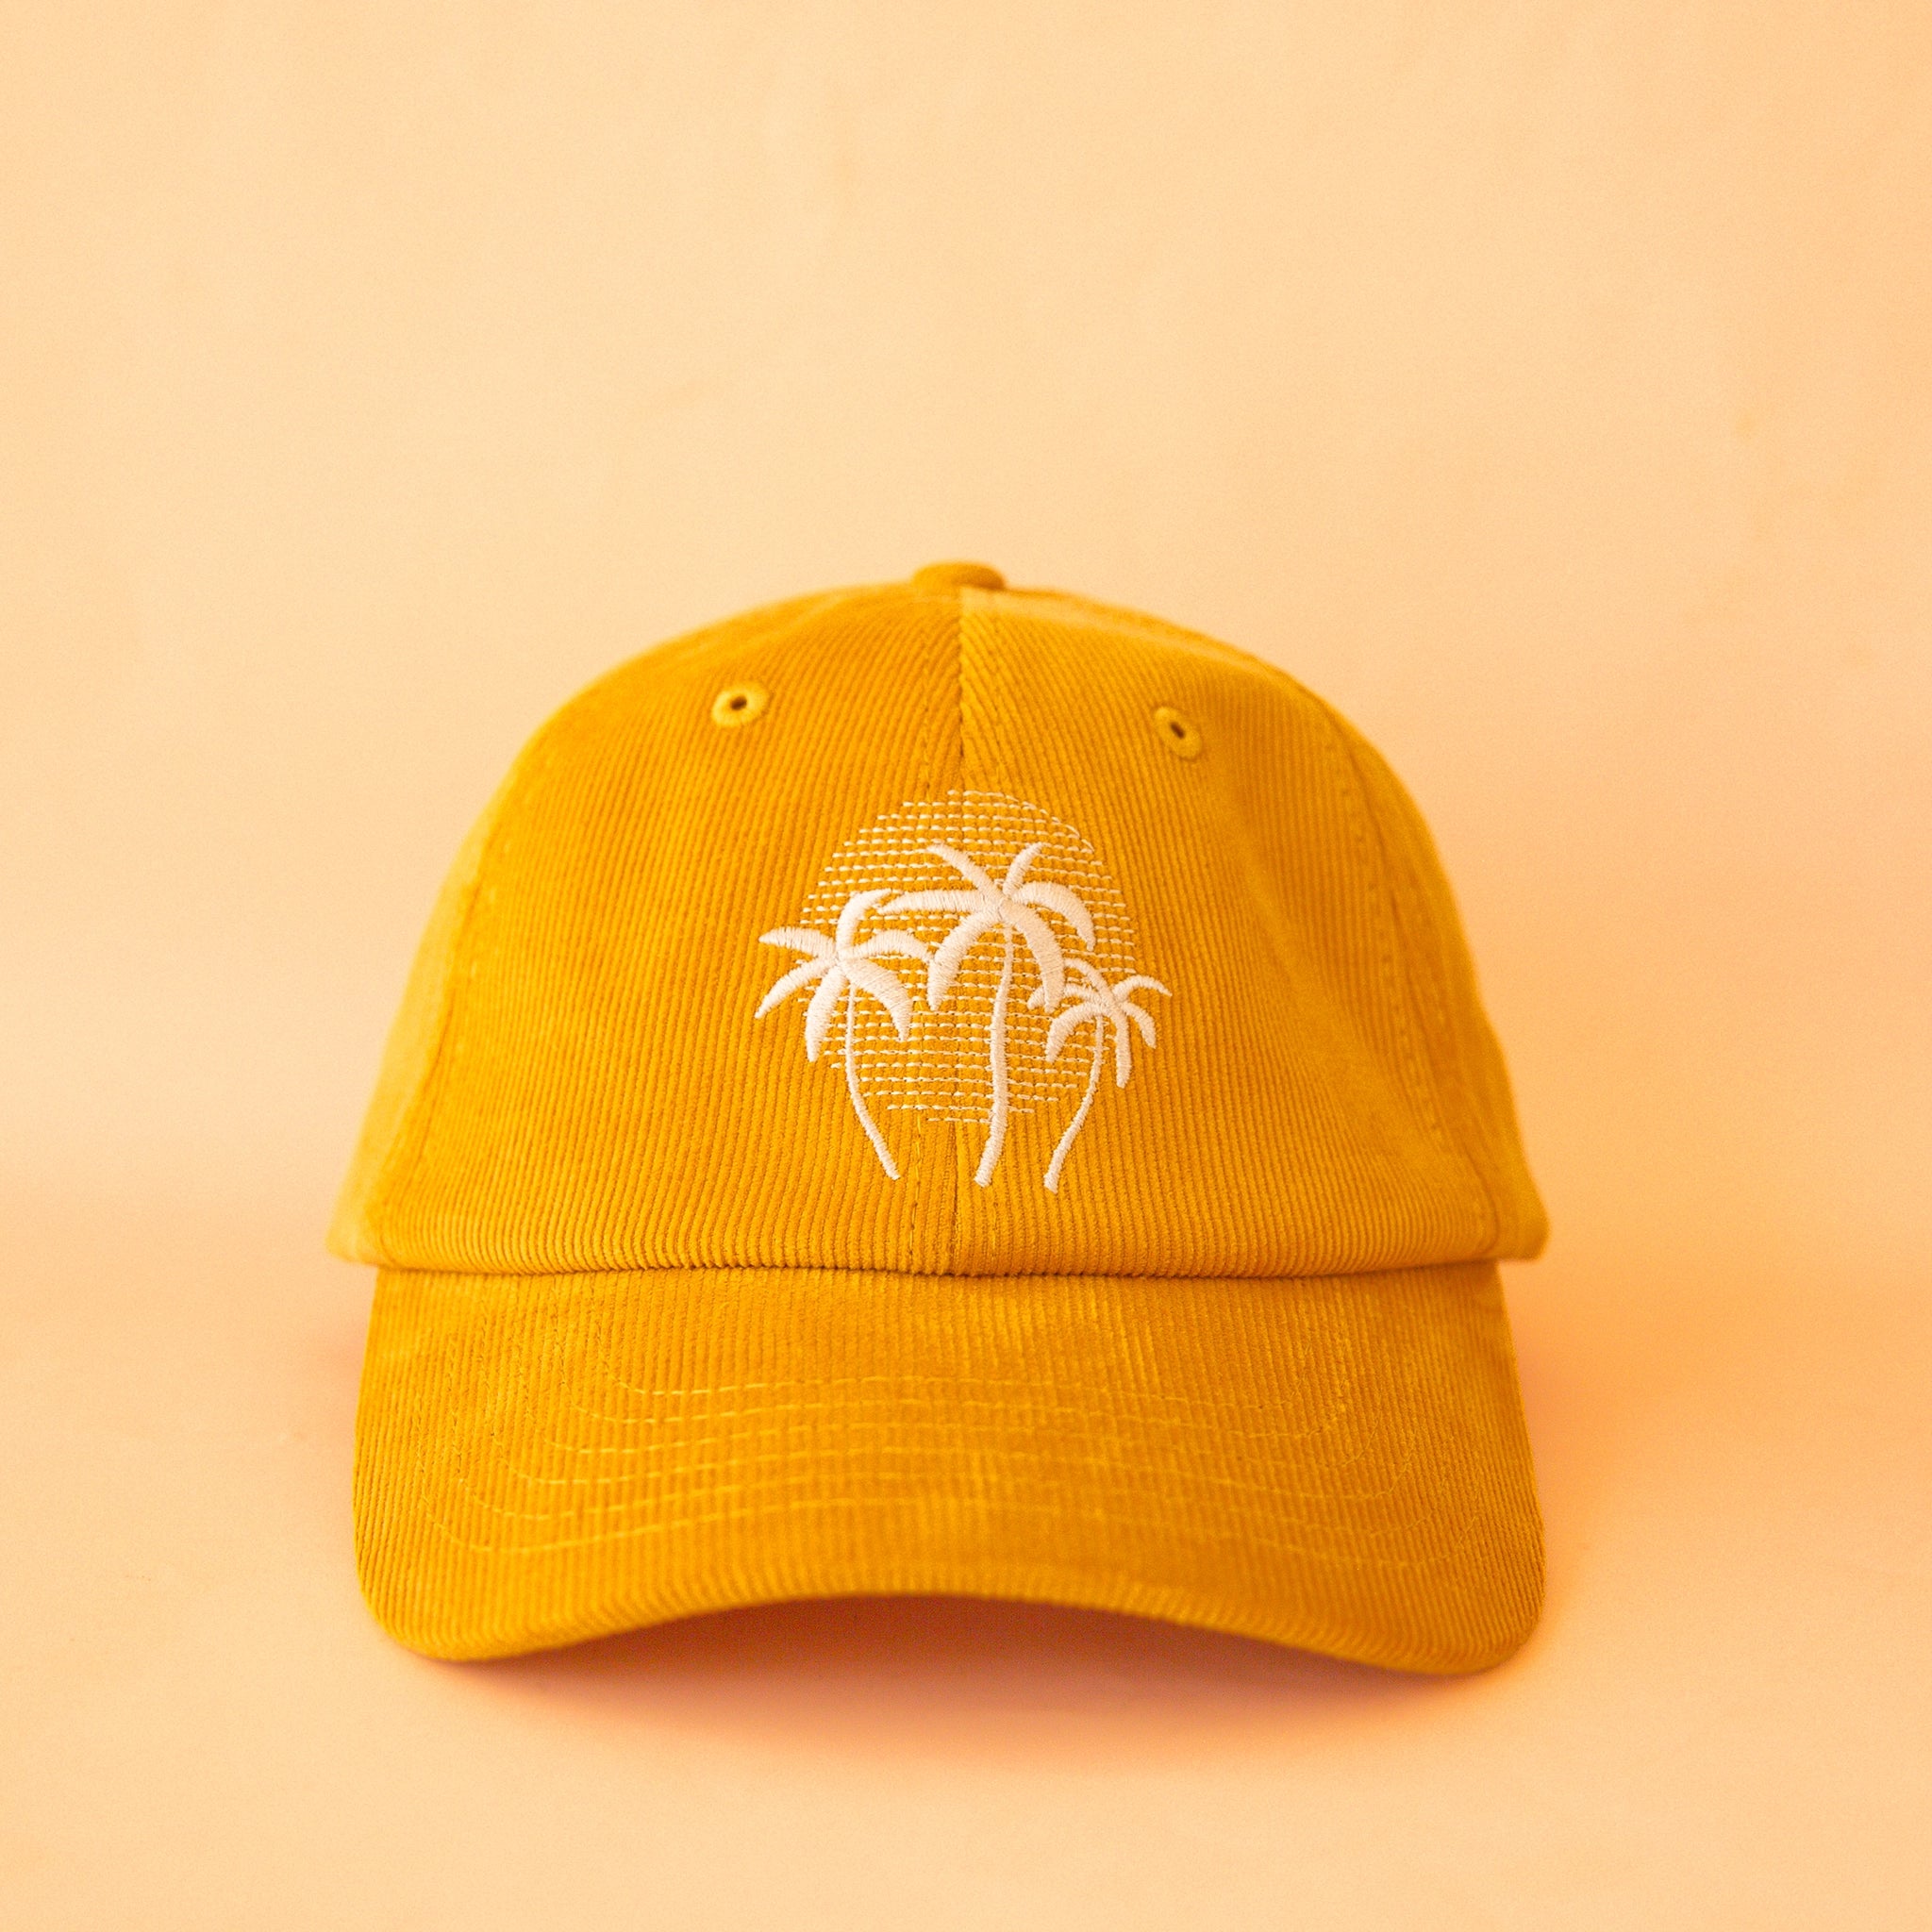 On a light yellow background is a golden yellow corduroy baseball hat with a white palm tree design in the center. 